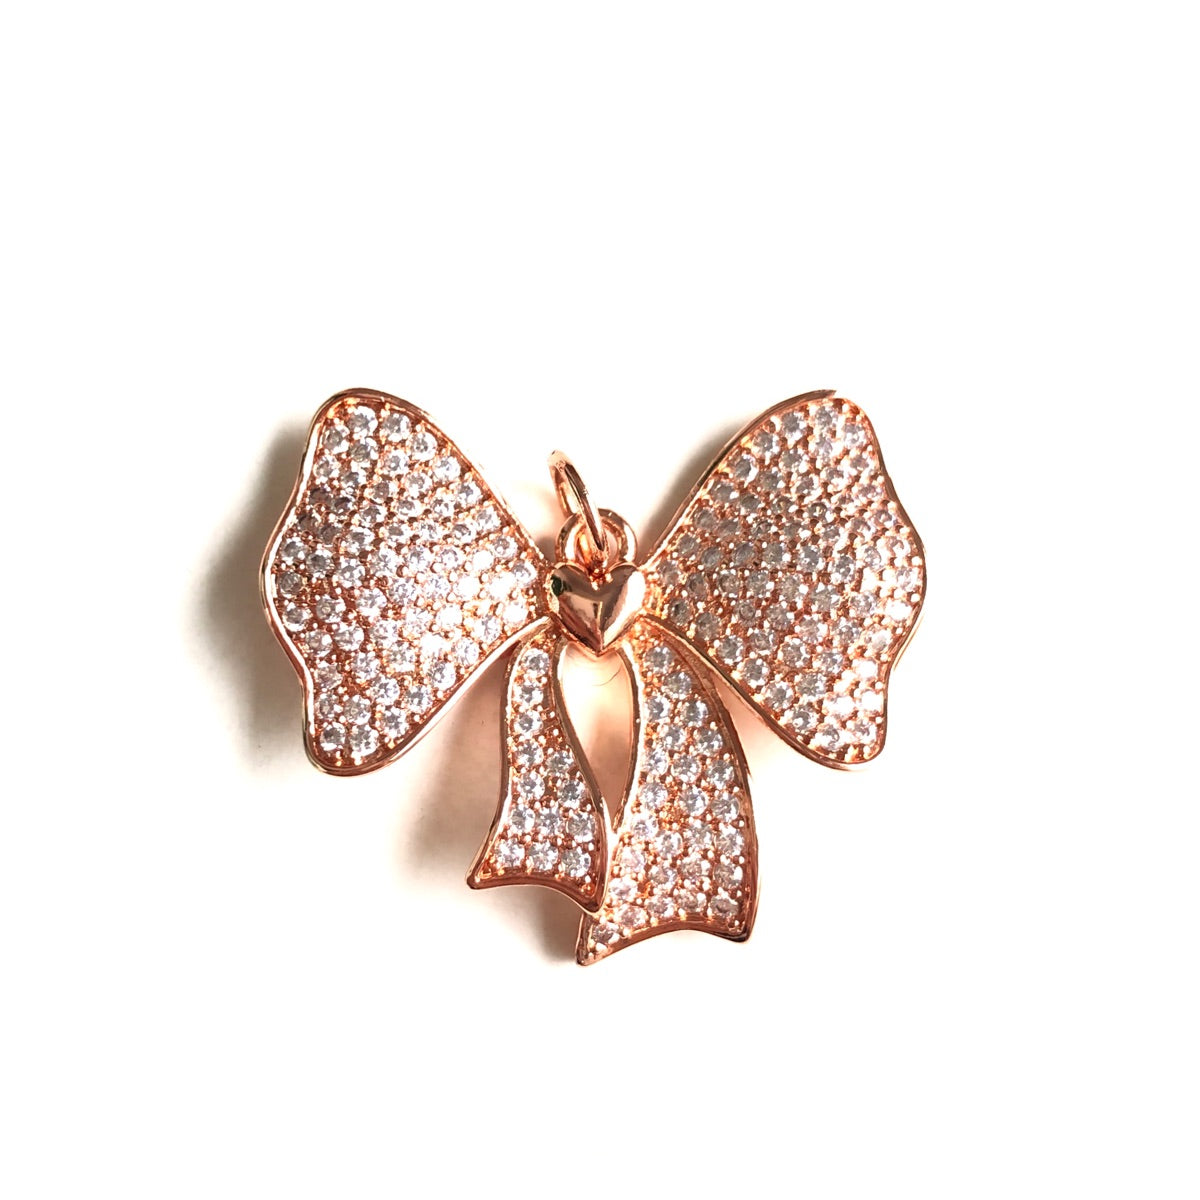 10pcs/lot 30*26mm CZ Paved Bow Bowknot Charms Rose Gold CZ Paved Charms Bow Ties New Charms Arrivals Charms Beads Beyond